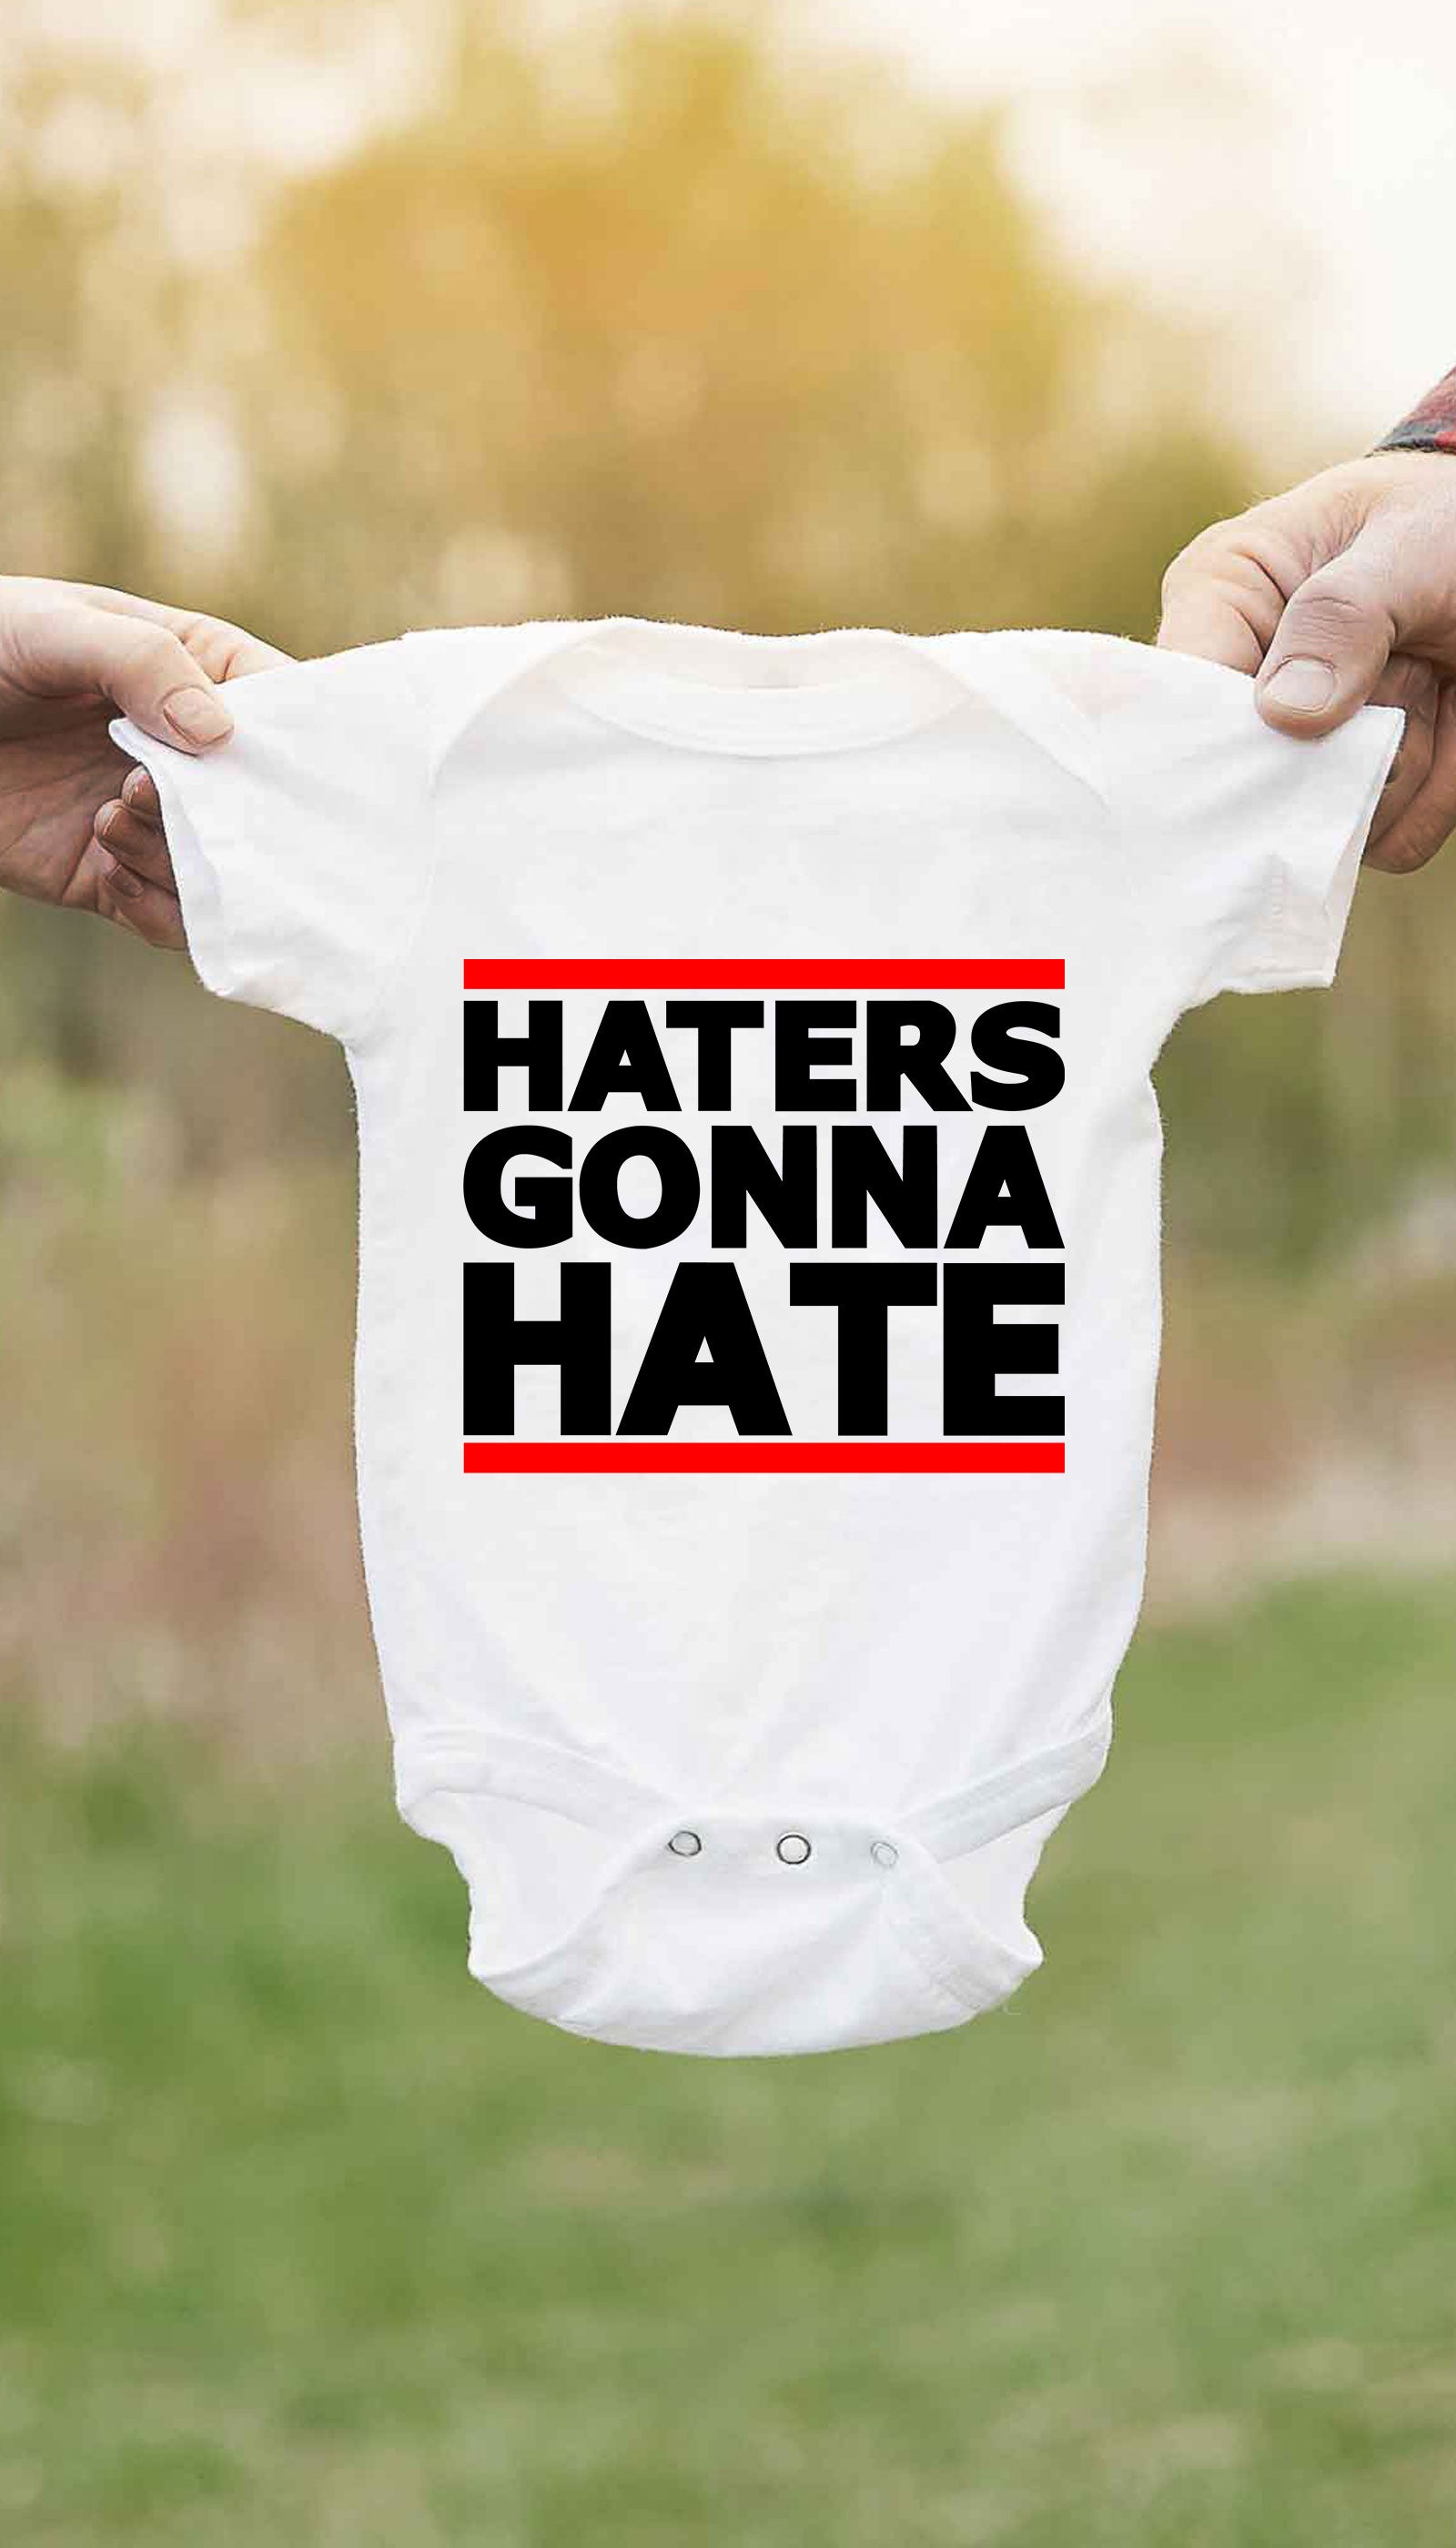 Haters Gonna Hate Cute & Funny Baby Infant Onesie